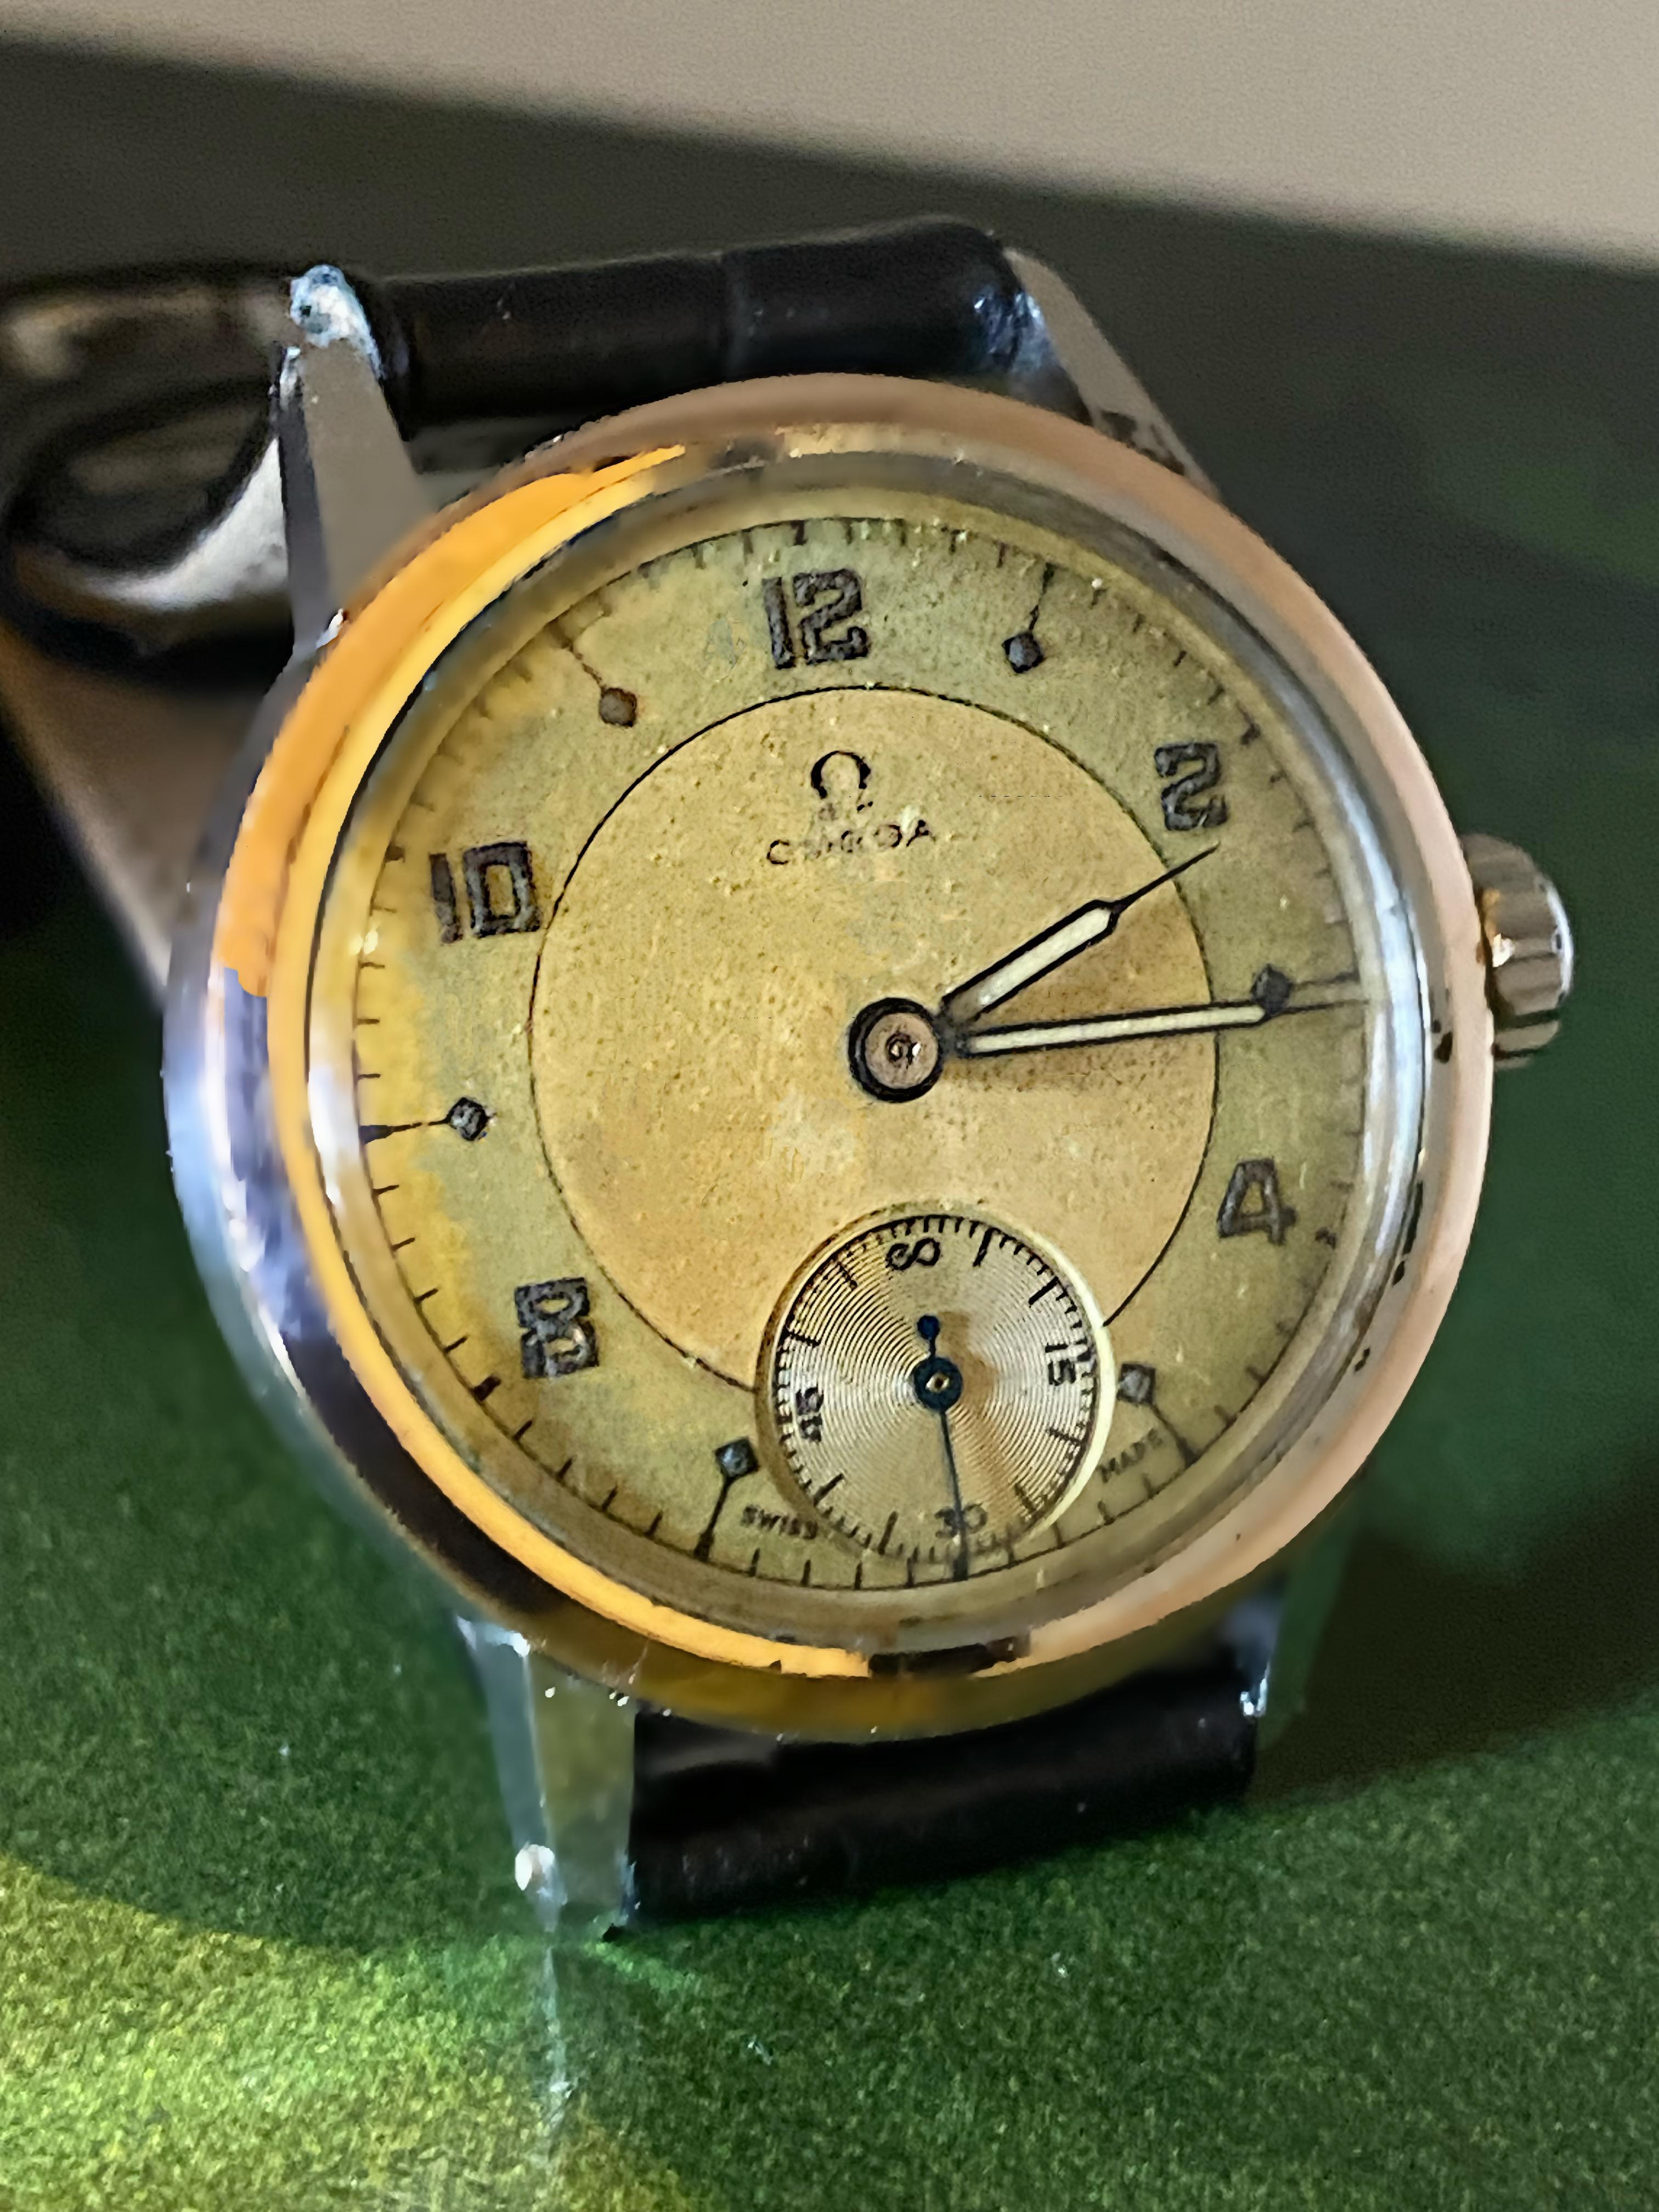 Timepieces by Omega have been long admired for their functionality, desirability & power. 

This particular example is a Military watch, dating from circa 1943. 


~~~


Being in amazing original condition, in excellent working order, as well as